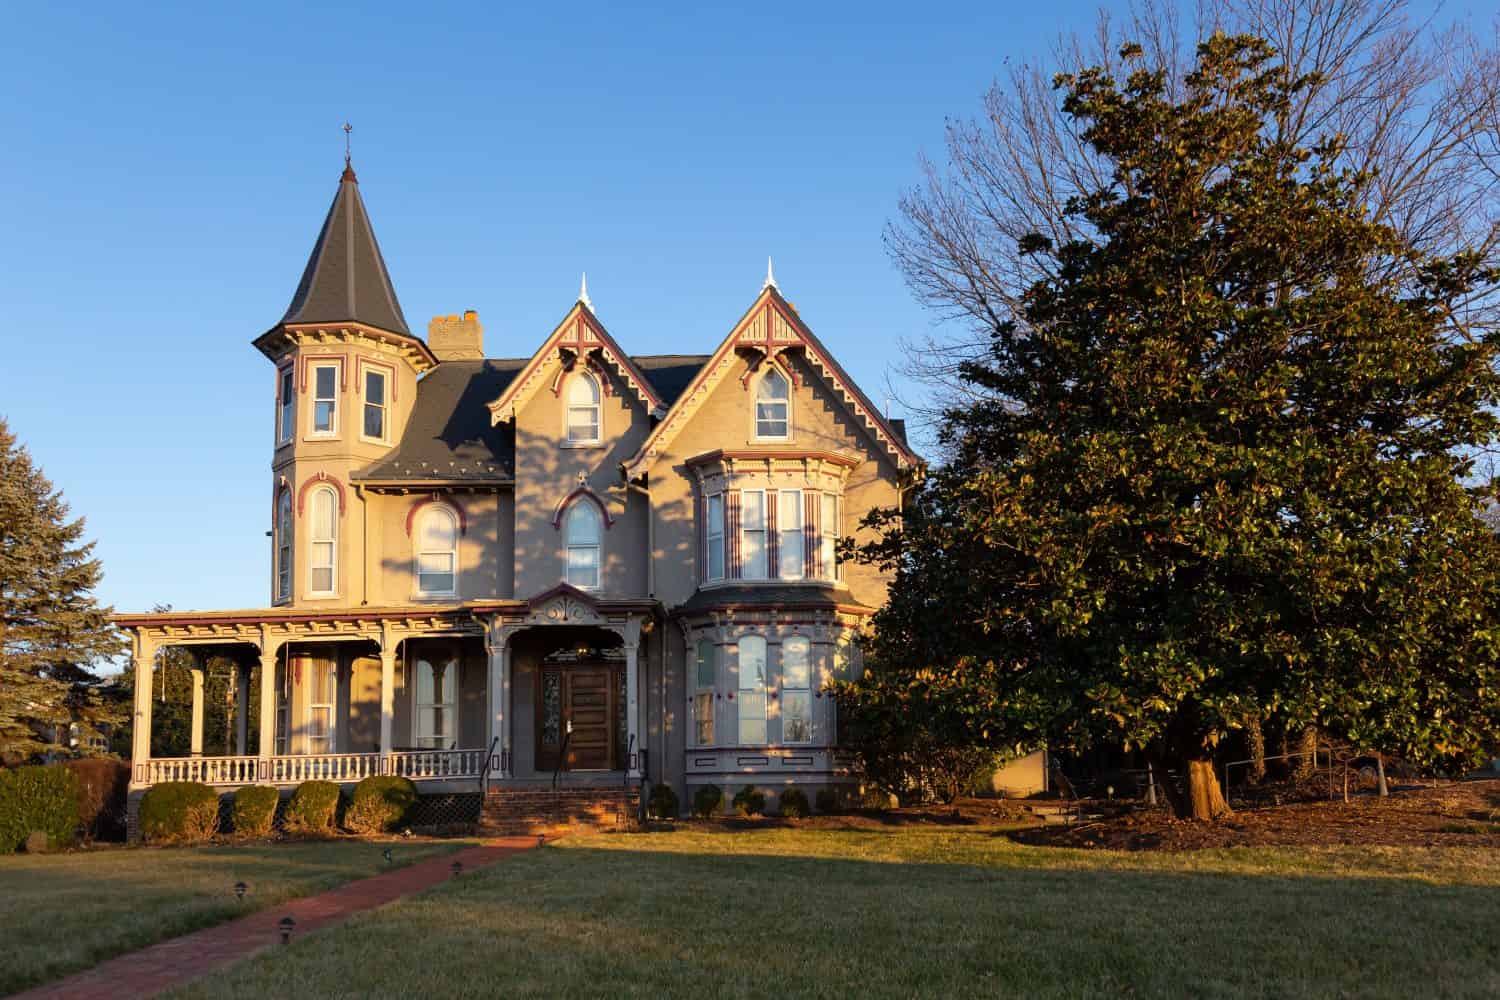 Beautiful Victorian style brick house with wooden details and tower seen during a golden hour winter afternoon, Harrisonburg, Virginia, USA